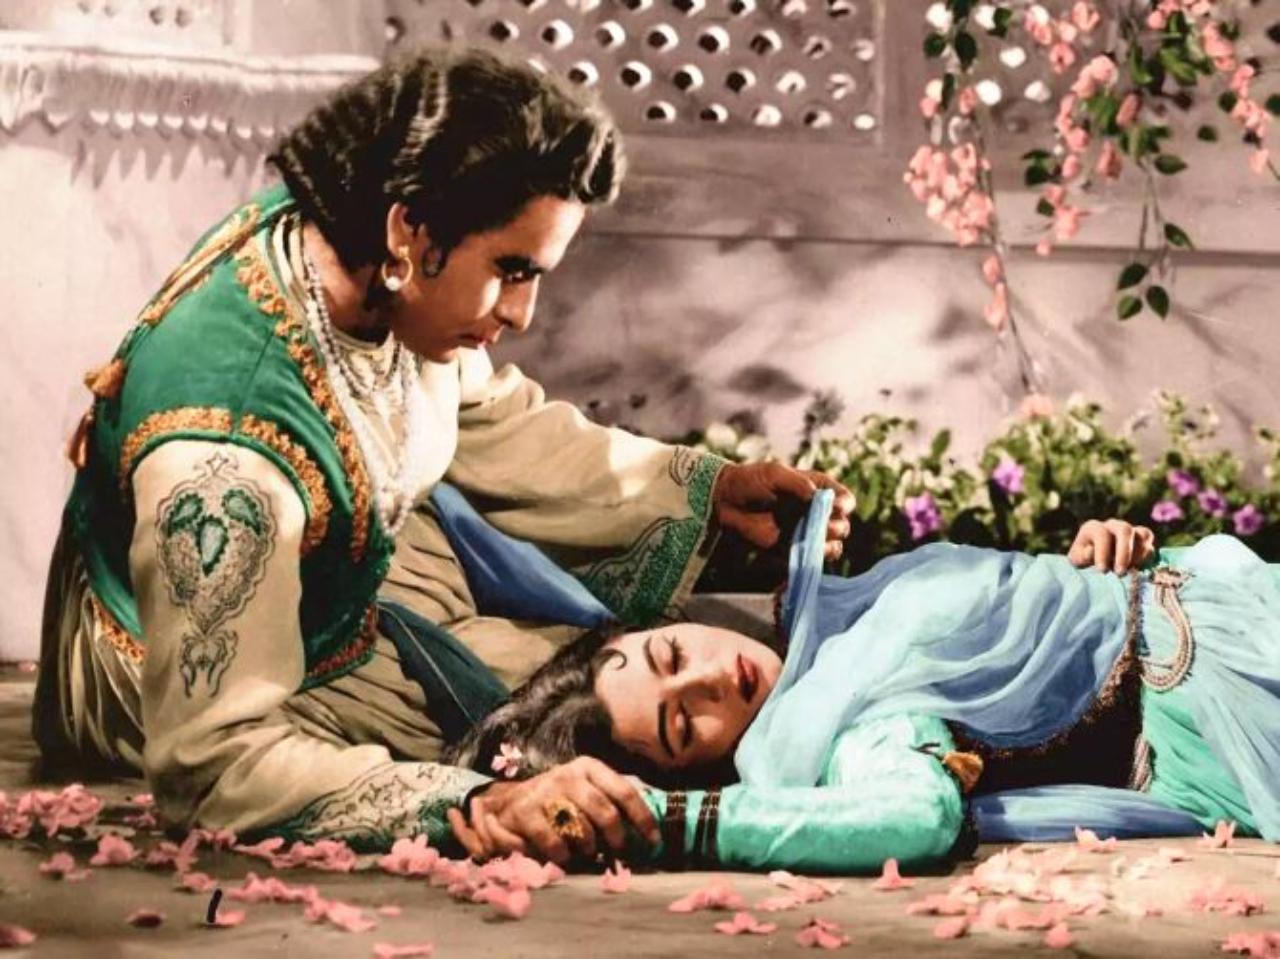 Madhubala and Kishore Kumar's marriage lasted for 9 years. The eternal beauty died in 1969 at the age of 36 due to a heart related illness